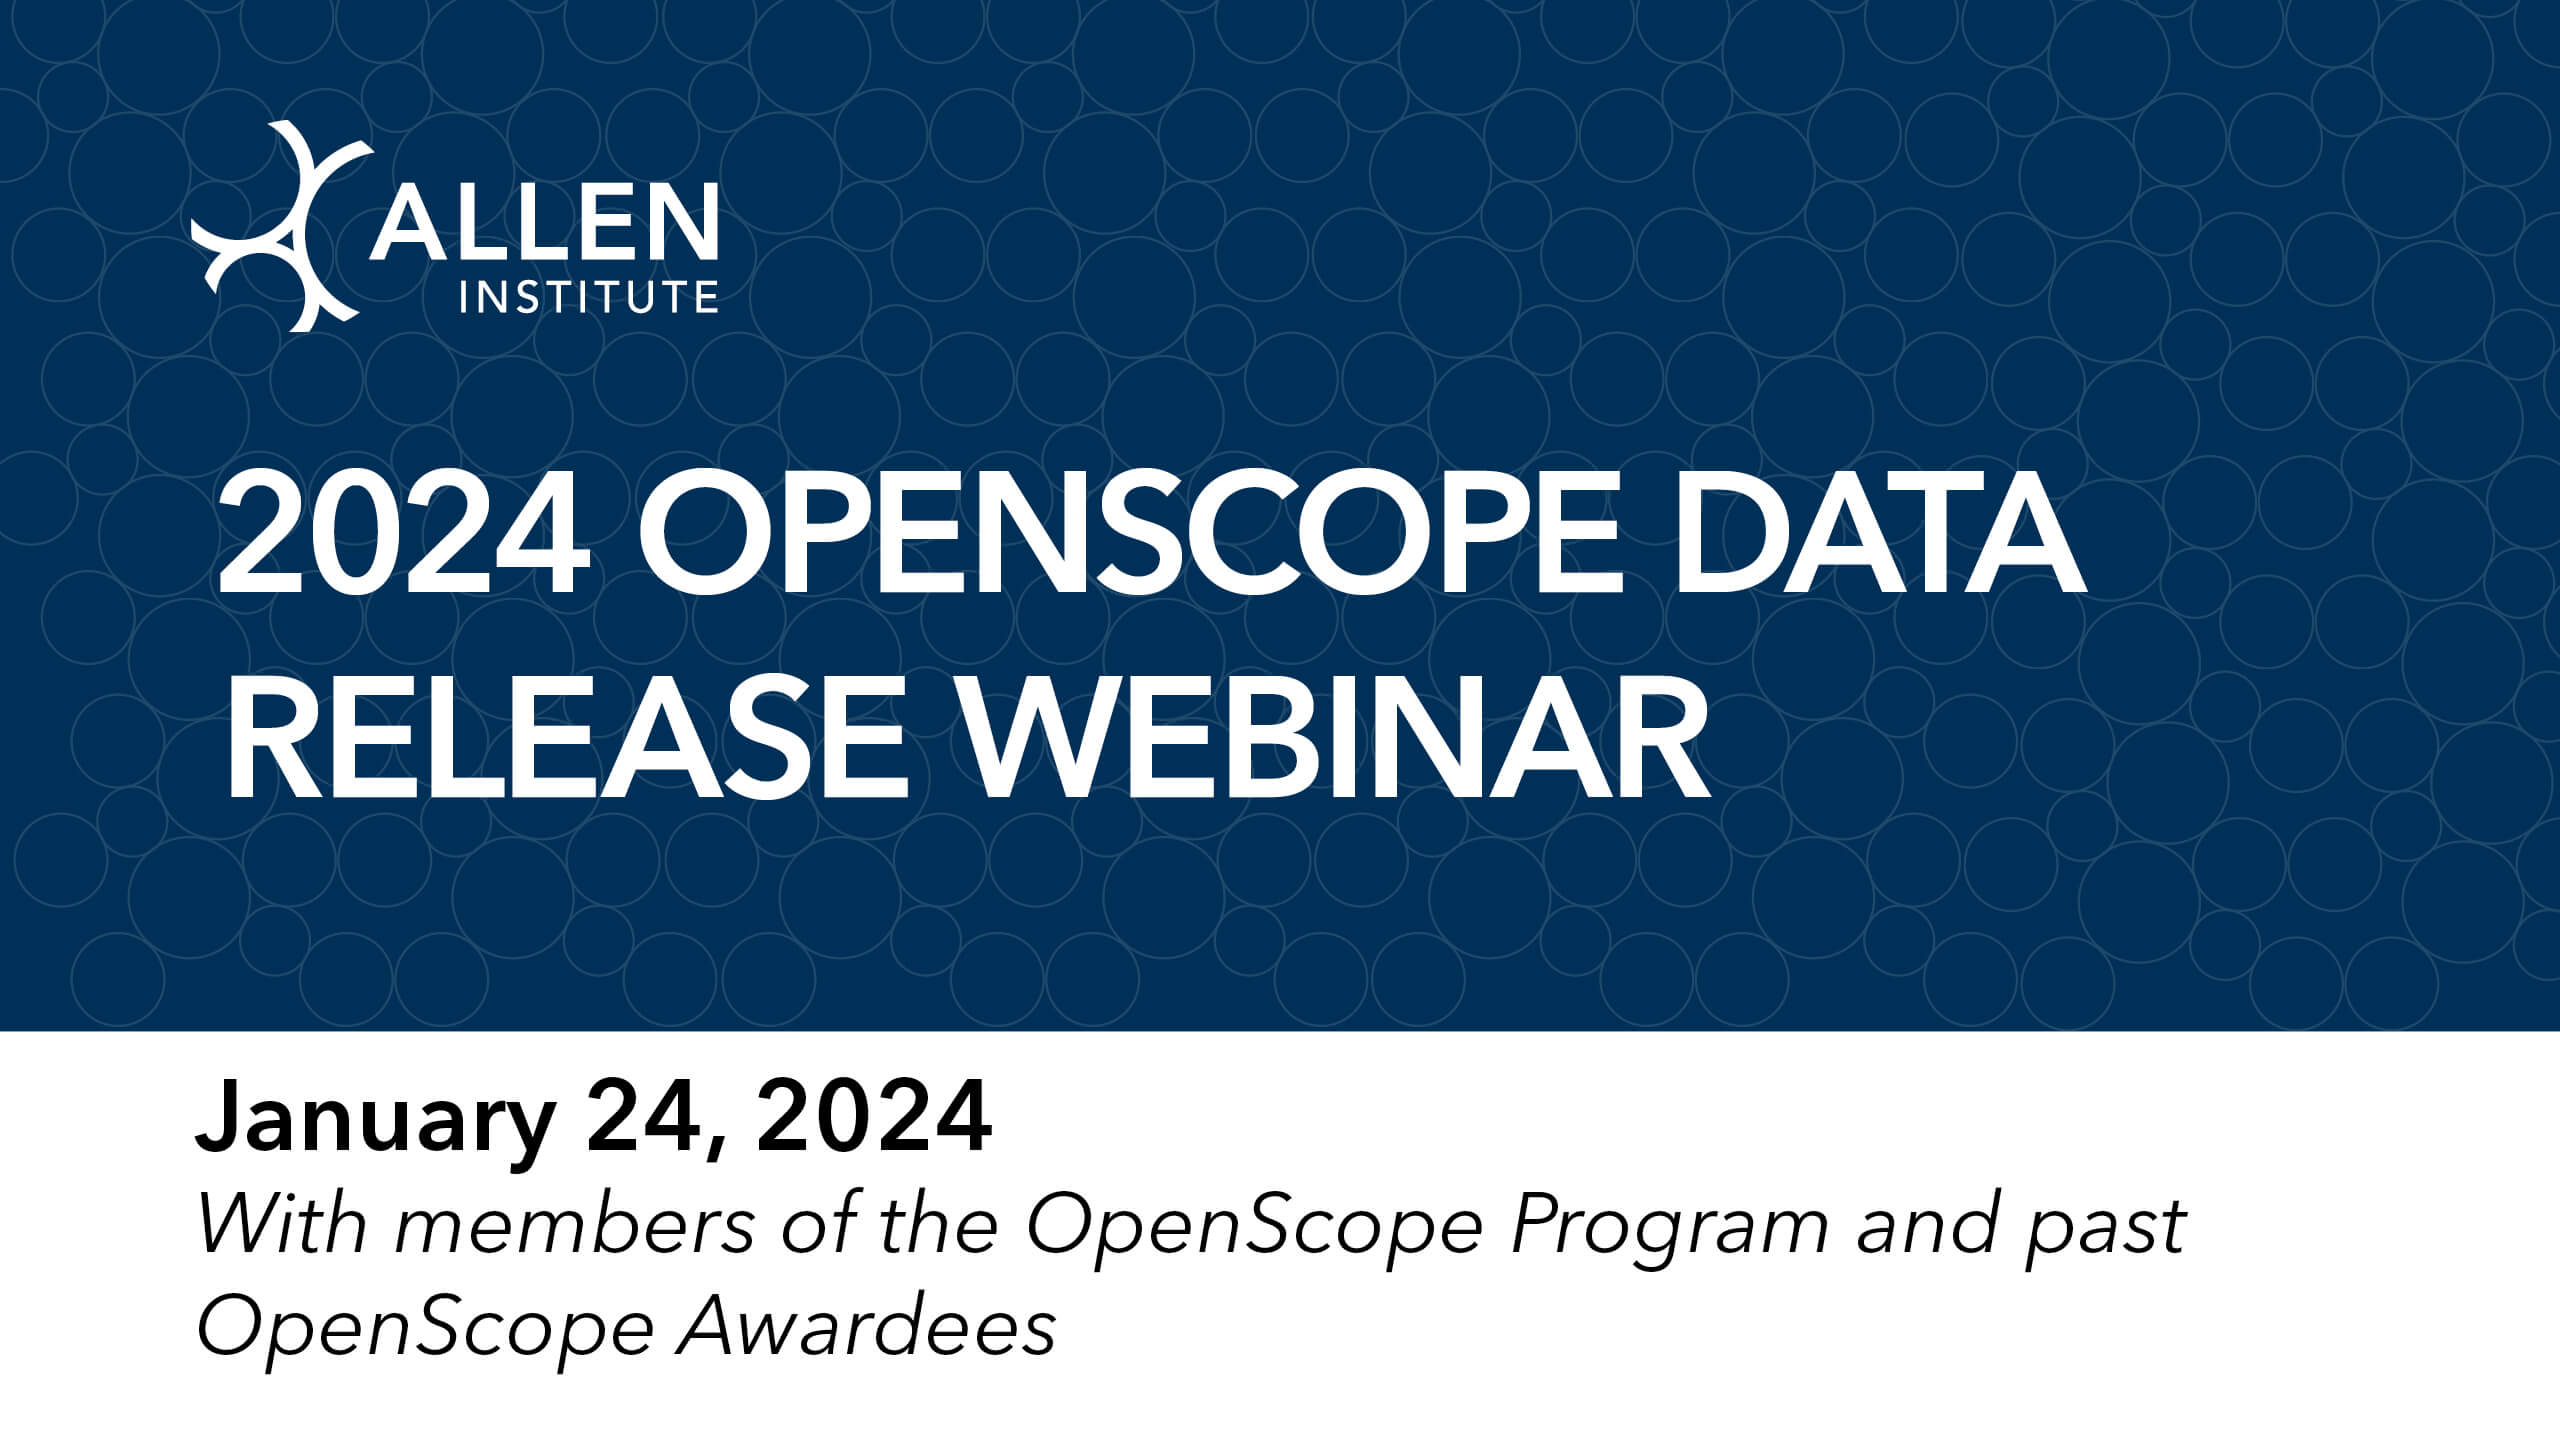 Navy blue background with white text that reads "2024 OpenScope Data Release Webinar" with a white background and black text that reads "January 24, 2024 with members of the OpenScope Program and past OpenScope Awardees"